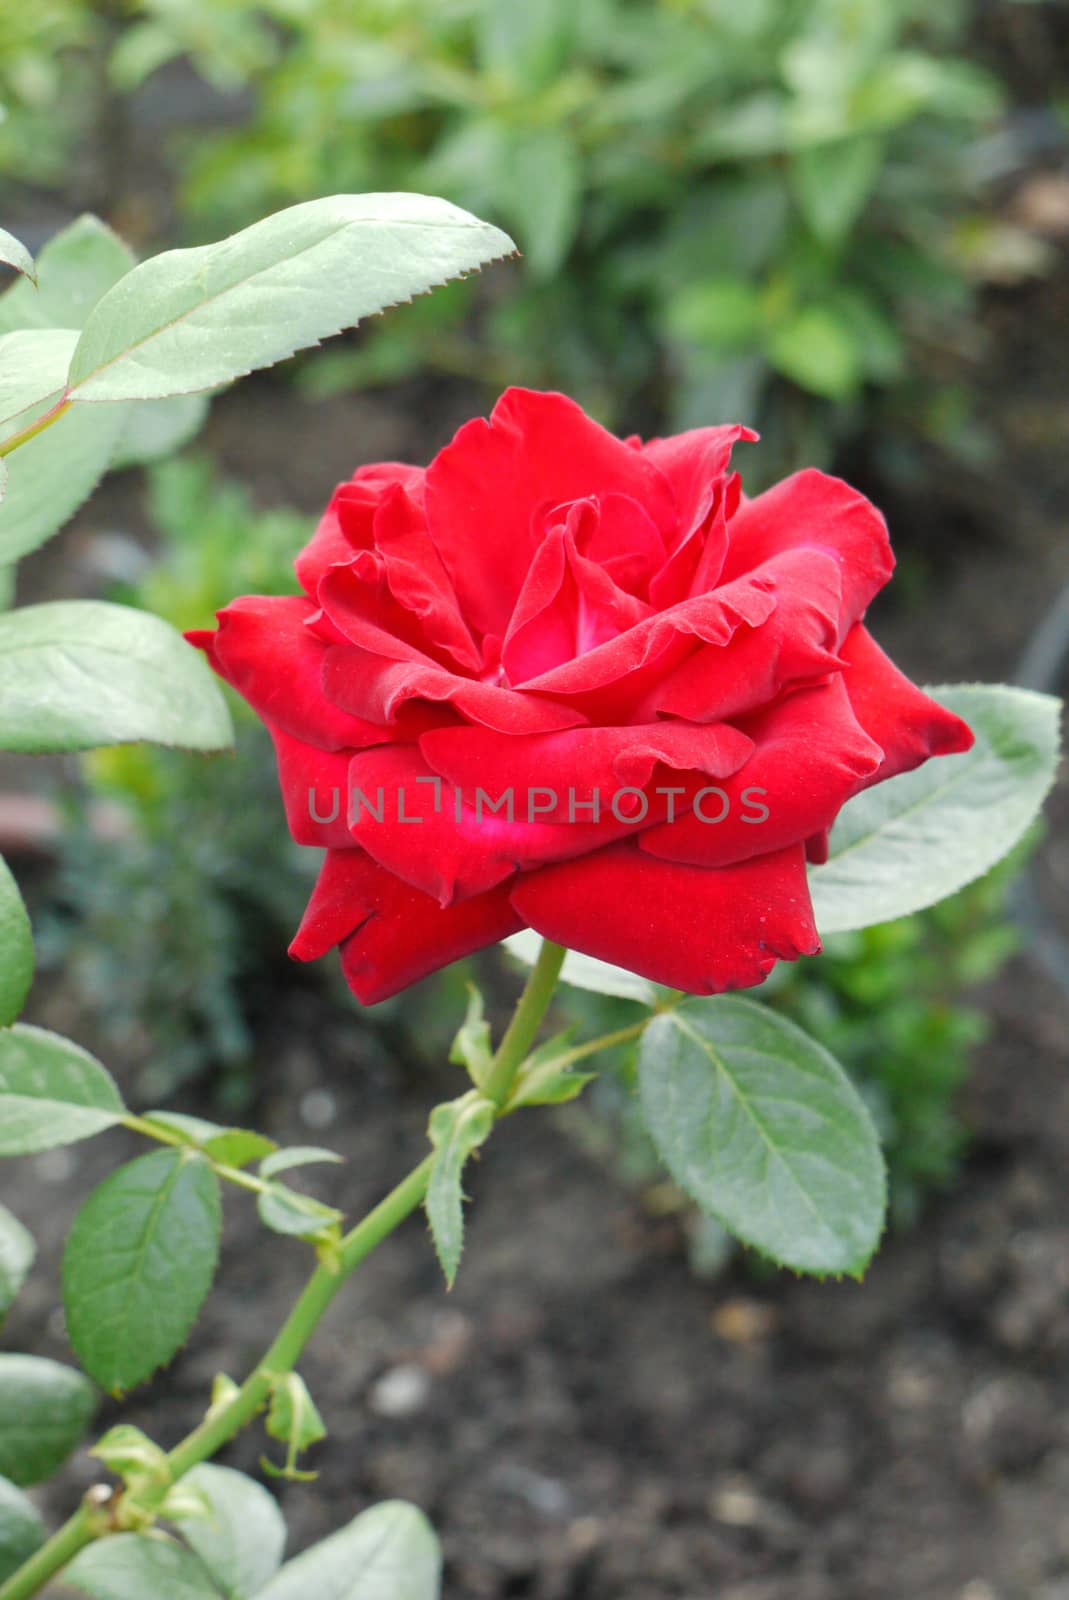 Queen of flowers, beautiful lush red rose on a high stalk with g by Adamchuk